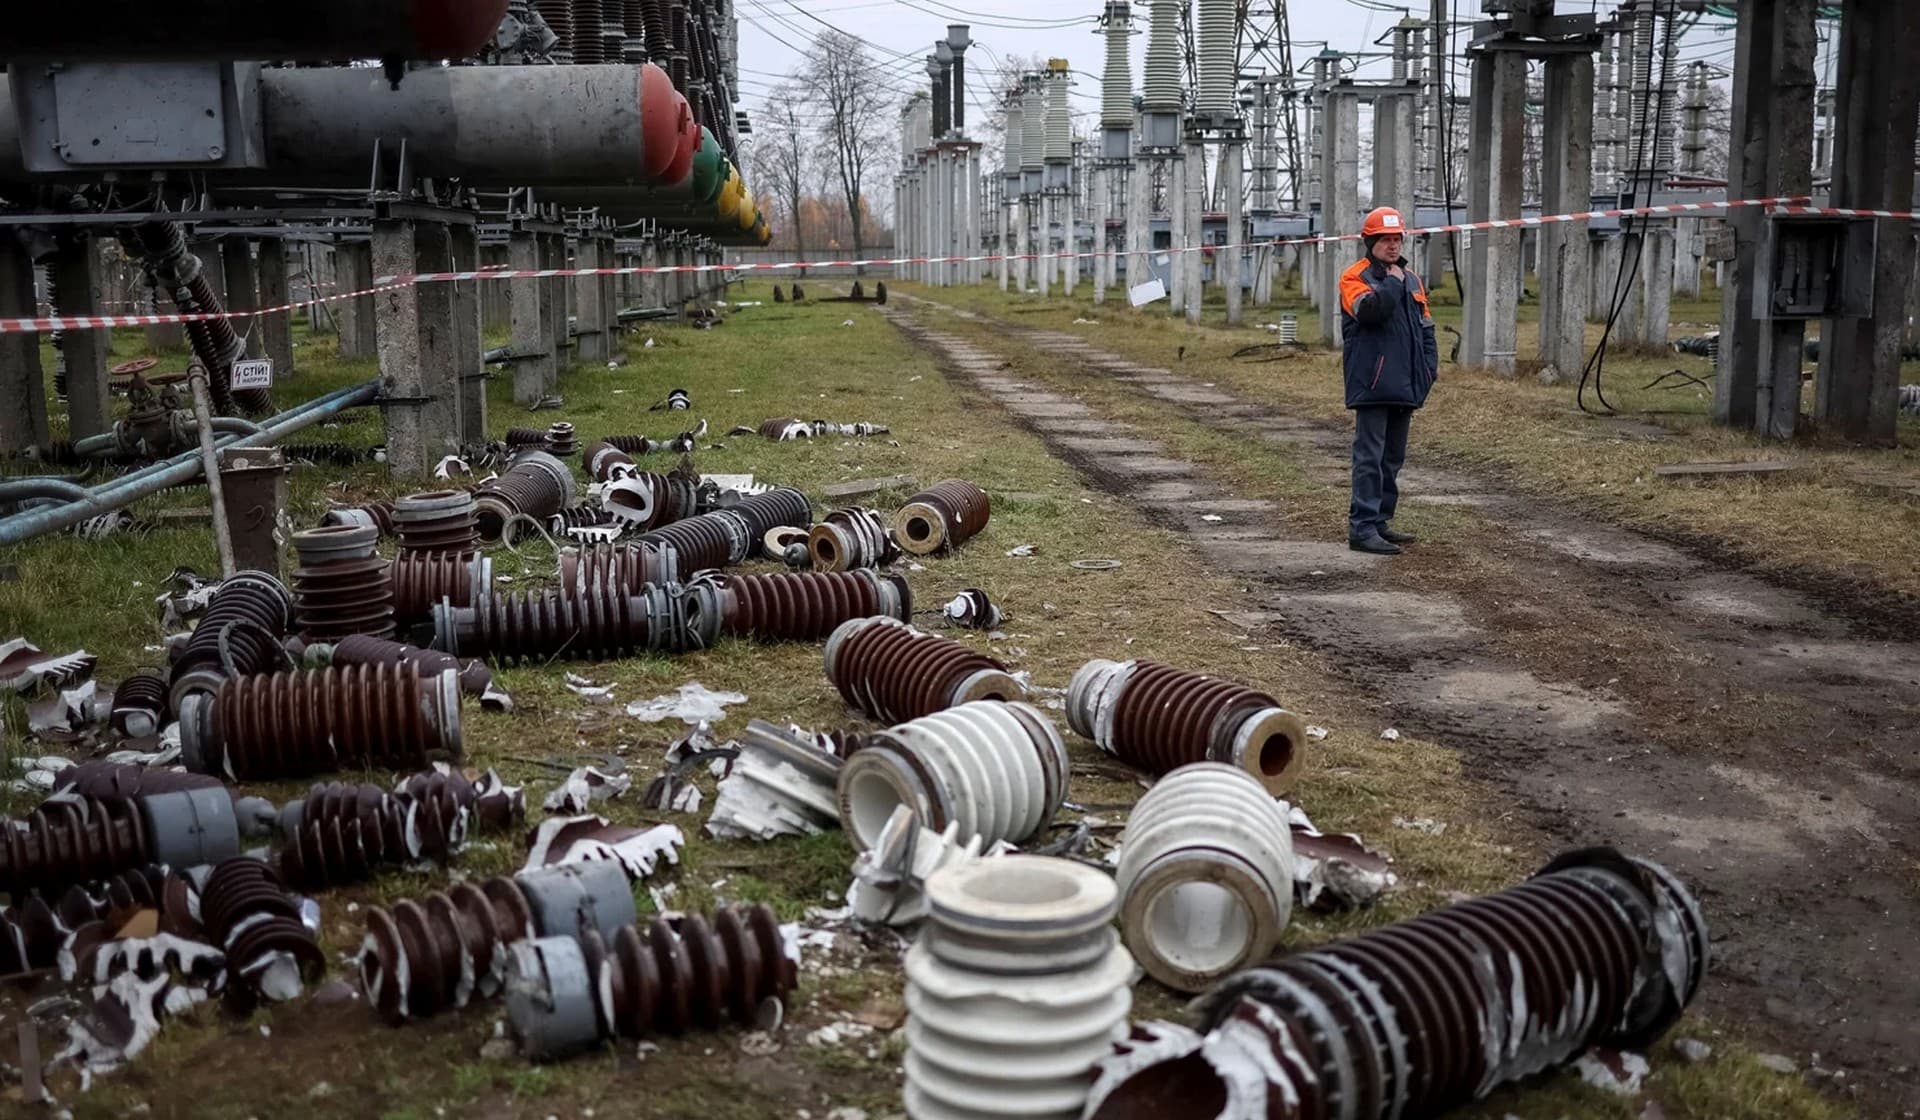 A worker at a high-voltage substation of Ukrenergo damaged in a Russian military strike in the central region of Ukraine, November 10, 2022.